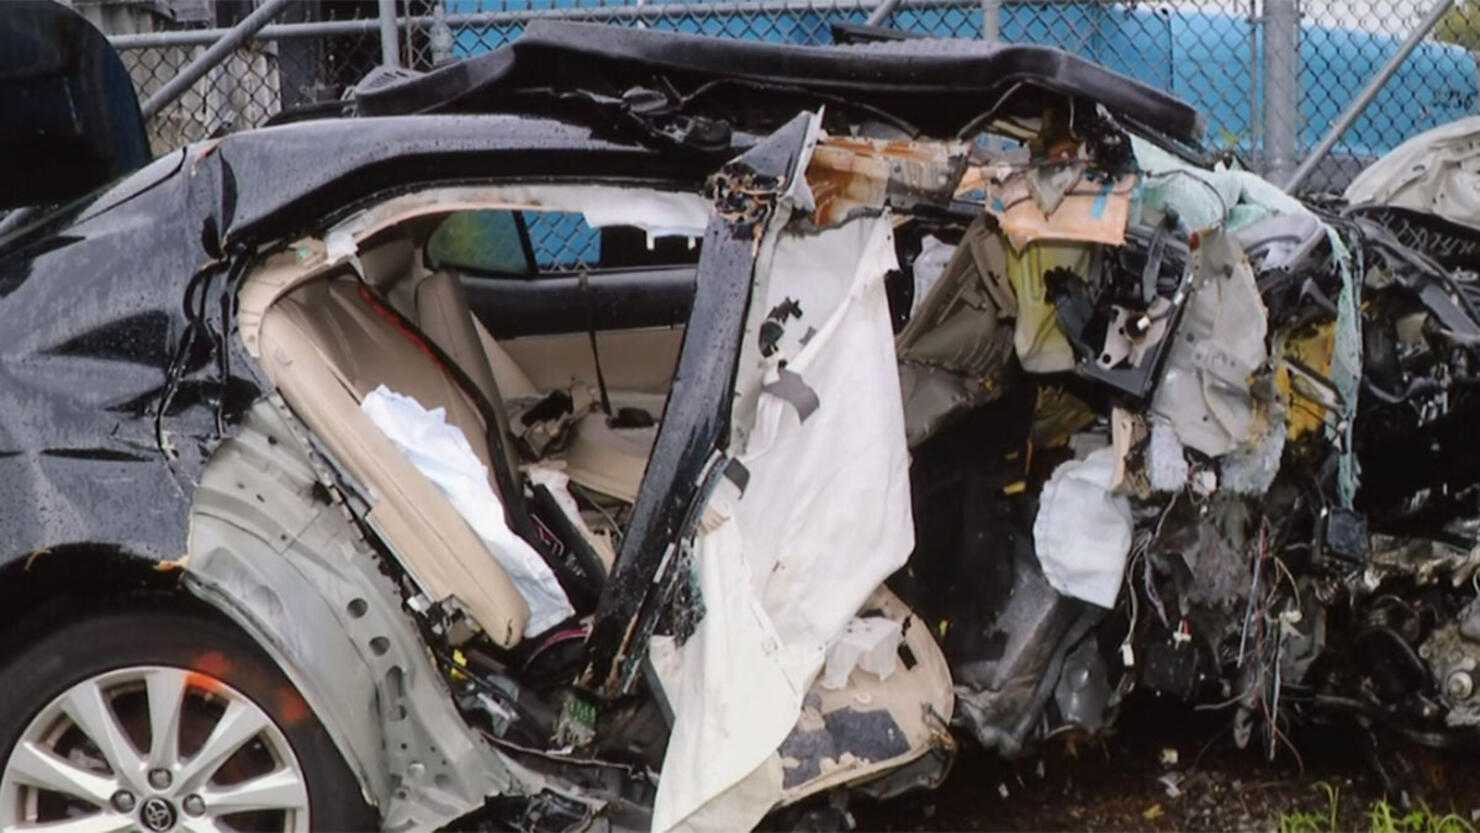 The result of a car crash that left two people dead